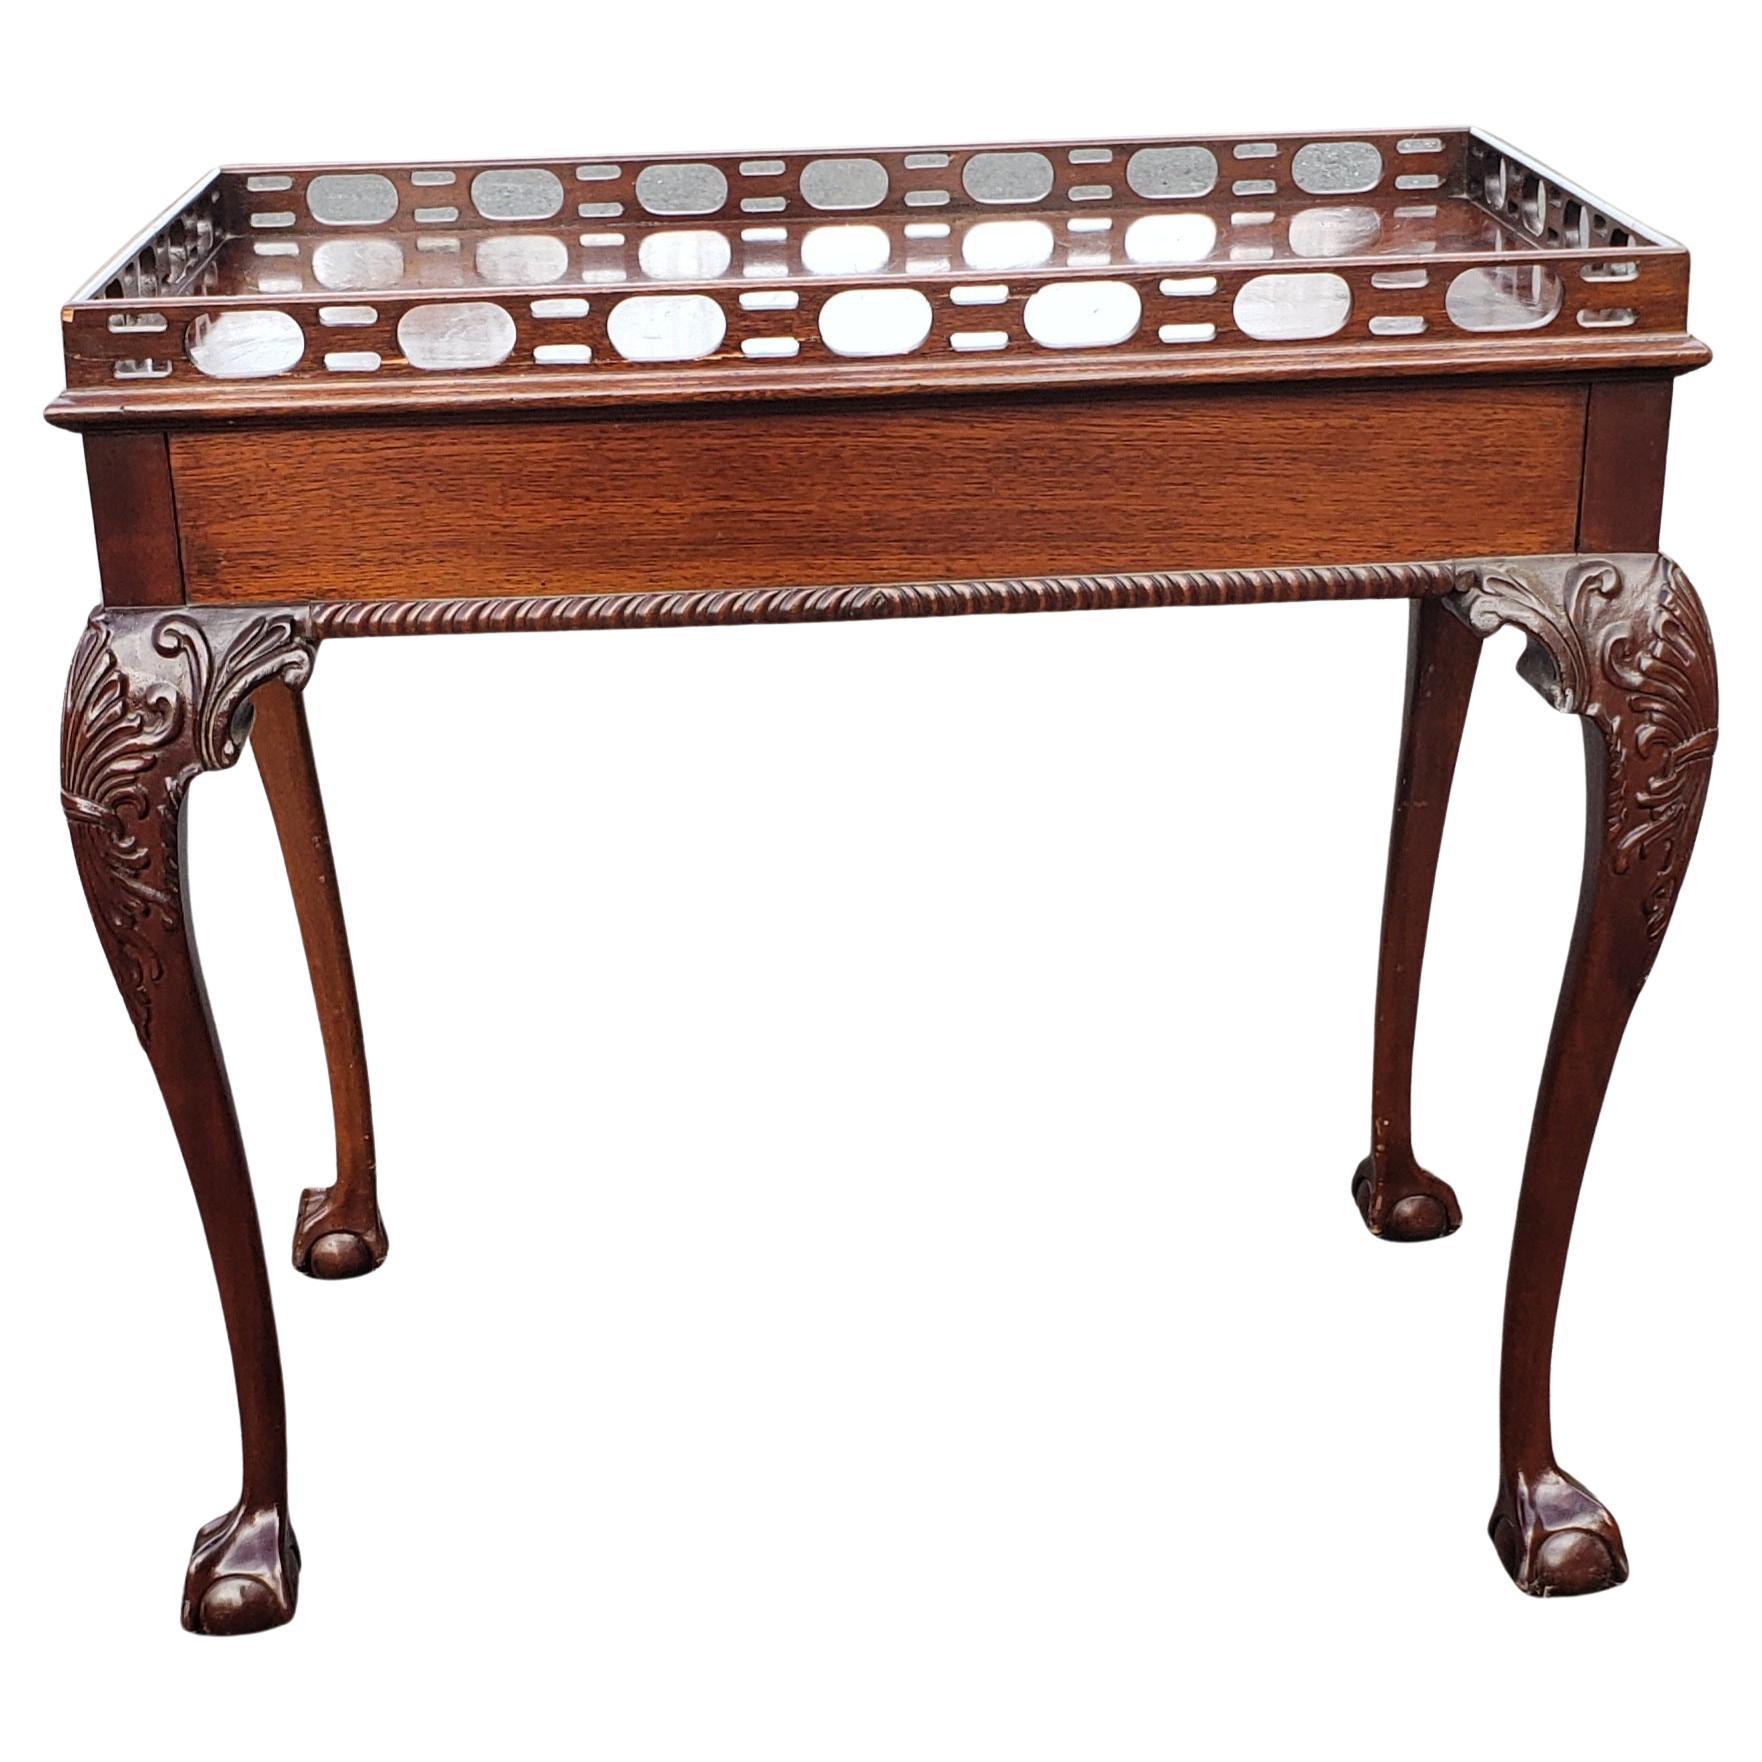 Américain Chippendale Flame Mahogany Ball & Claw Tea Table with Pierced Gallery en vente